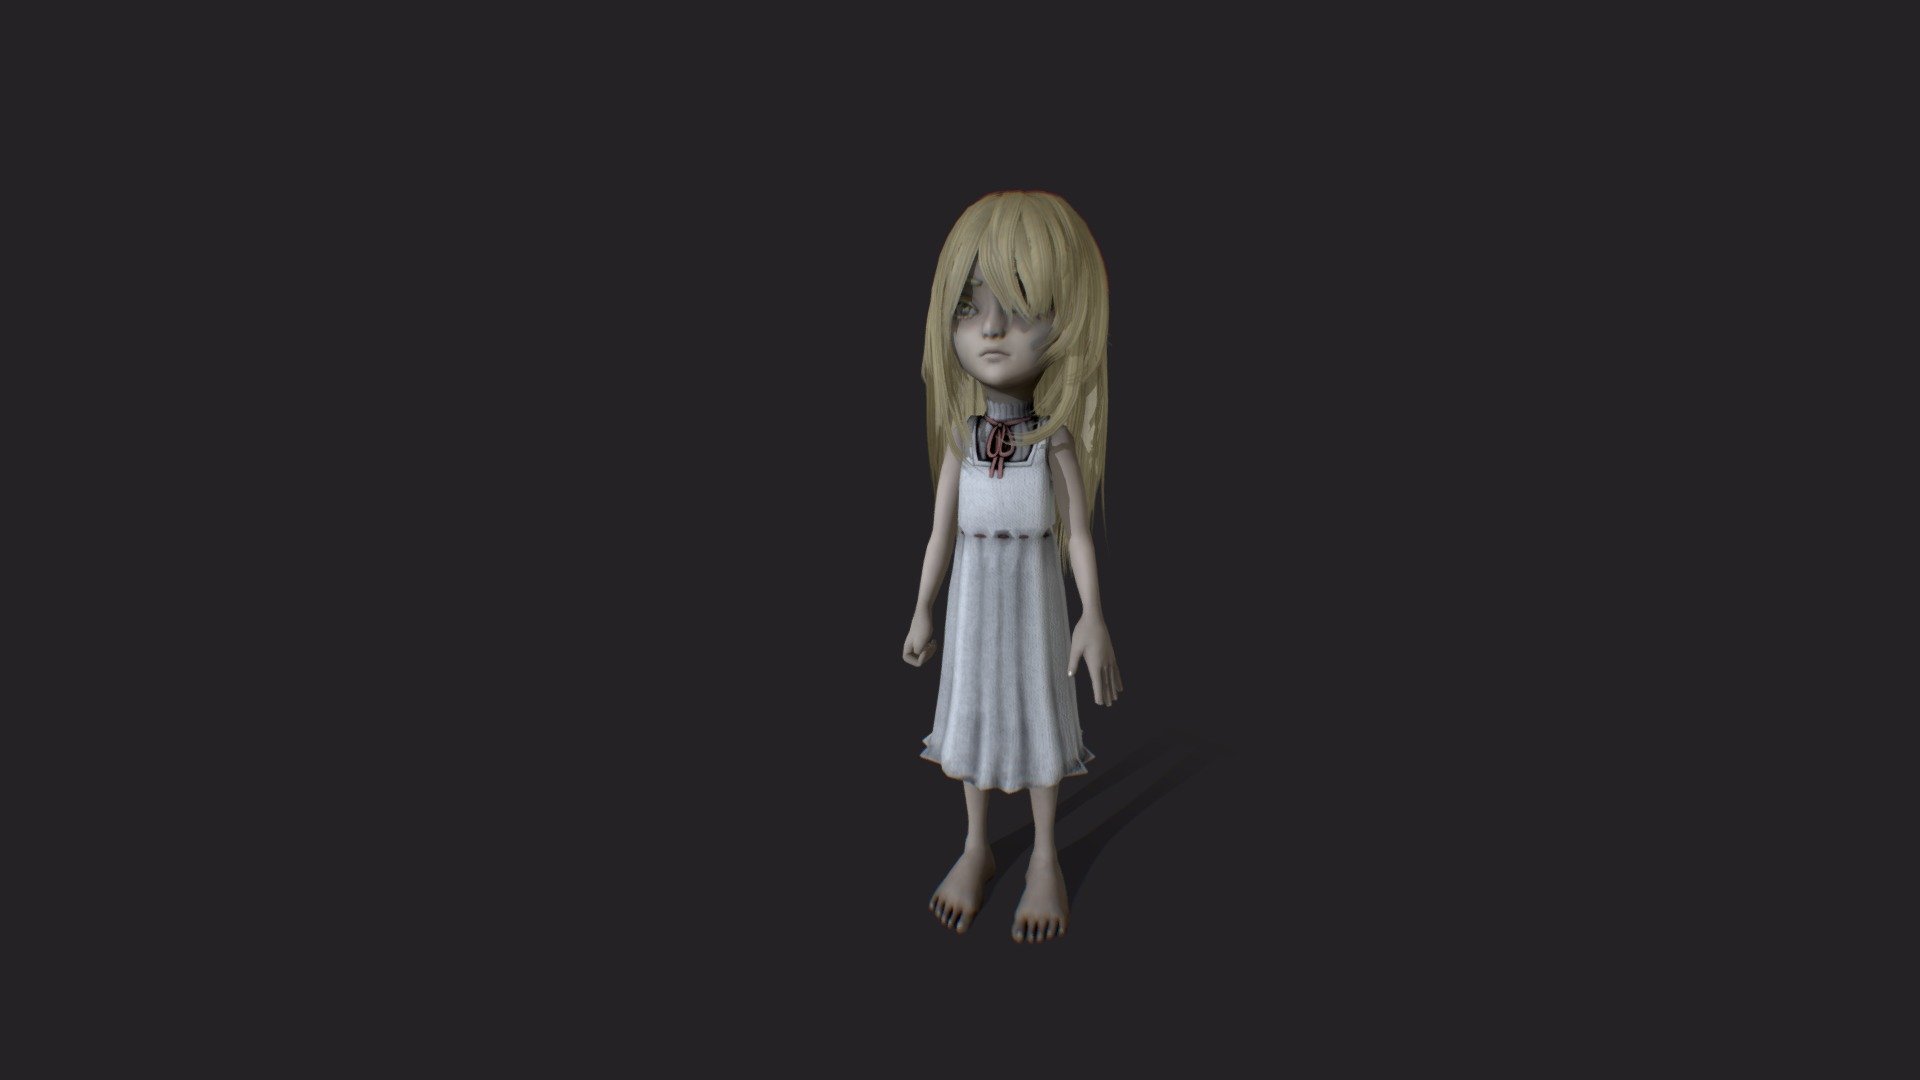 One of the main characters in the fan-story of Little Nightmares mæra 

Please help me turn this into a mod, I'm stuck at step 7.B&hellip; download WIP Mod, model, textures and stuff Link 
tutorial Link

See More art of Celine here Link

p.s. if you manage to fix it, feel free to upload it anywhere as long as you give me some credit in the description! - Little Nightmares Celine 3d model